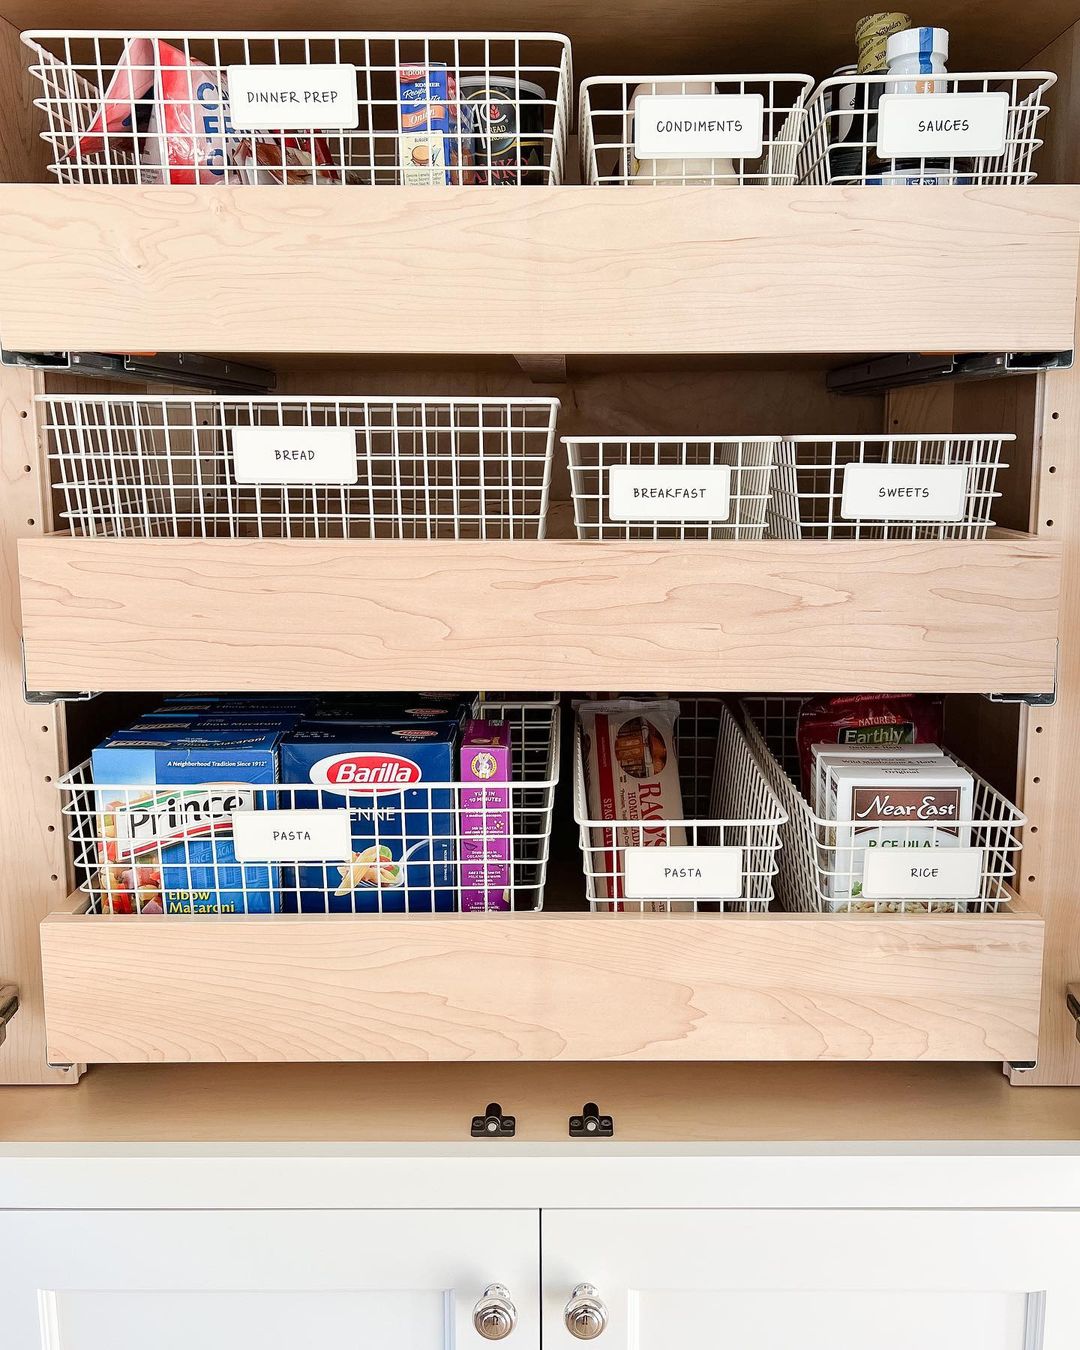 Organize your pantry with wire baskets filled with food for maximum efficiency.